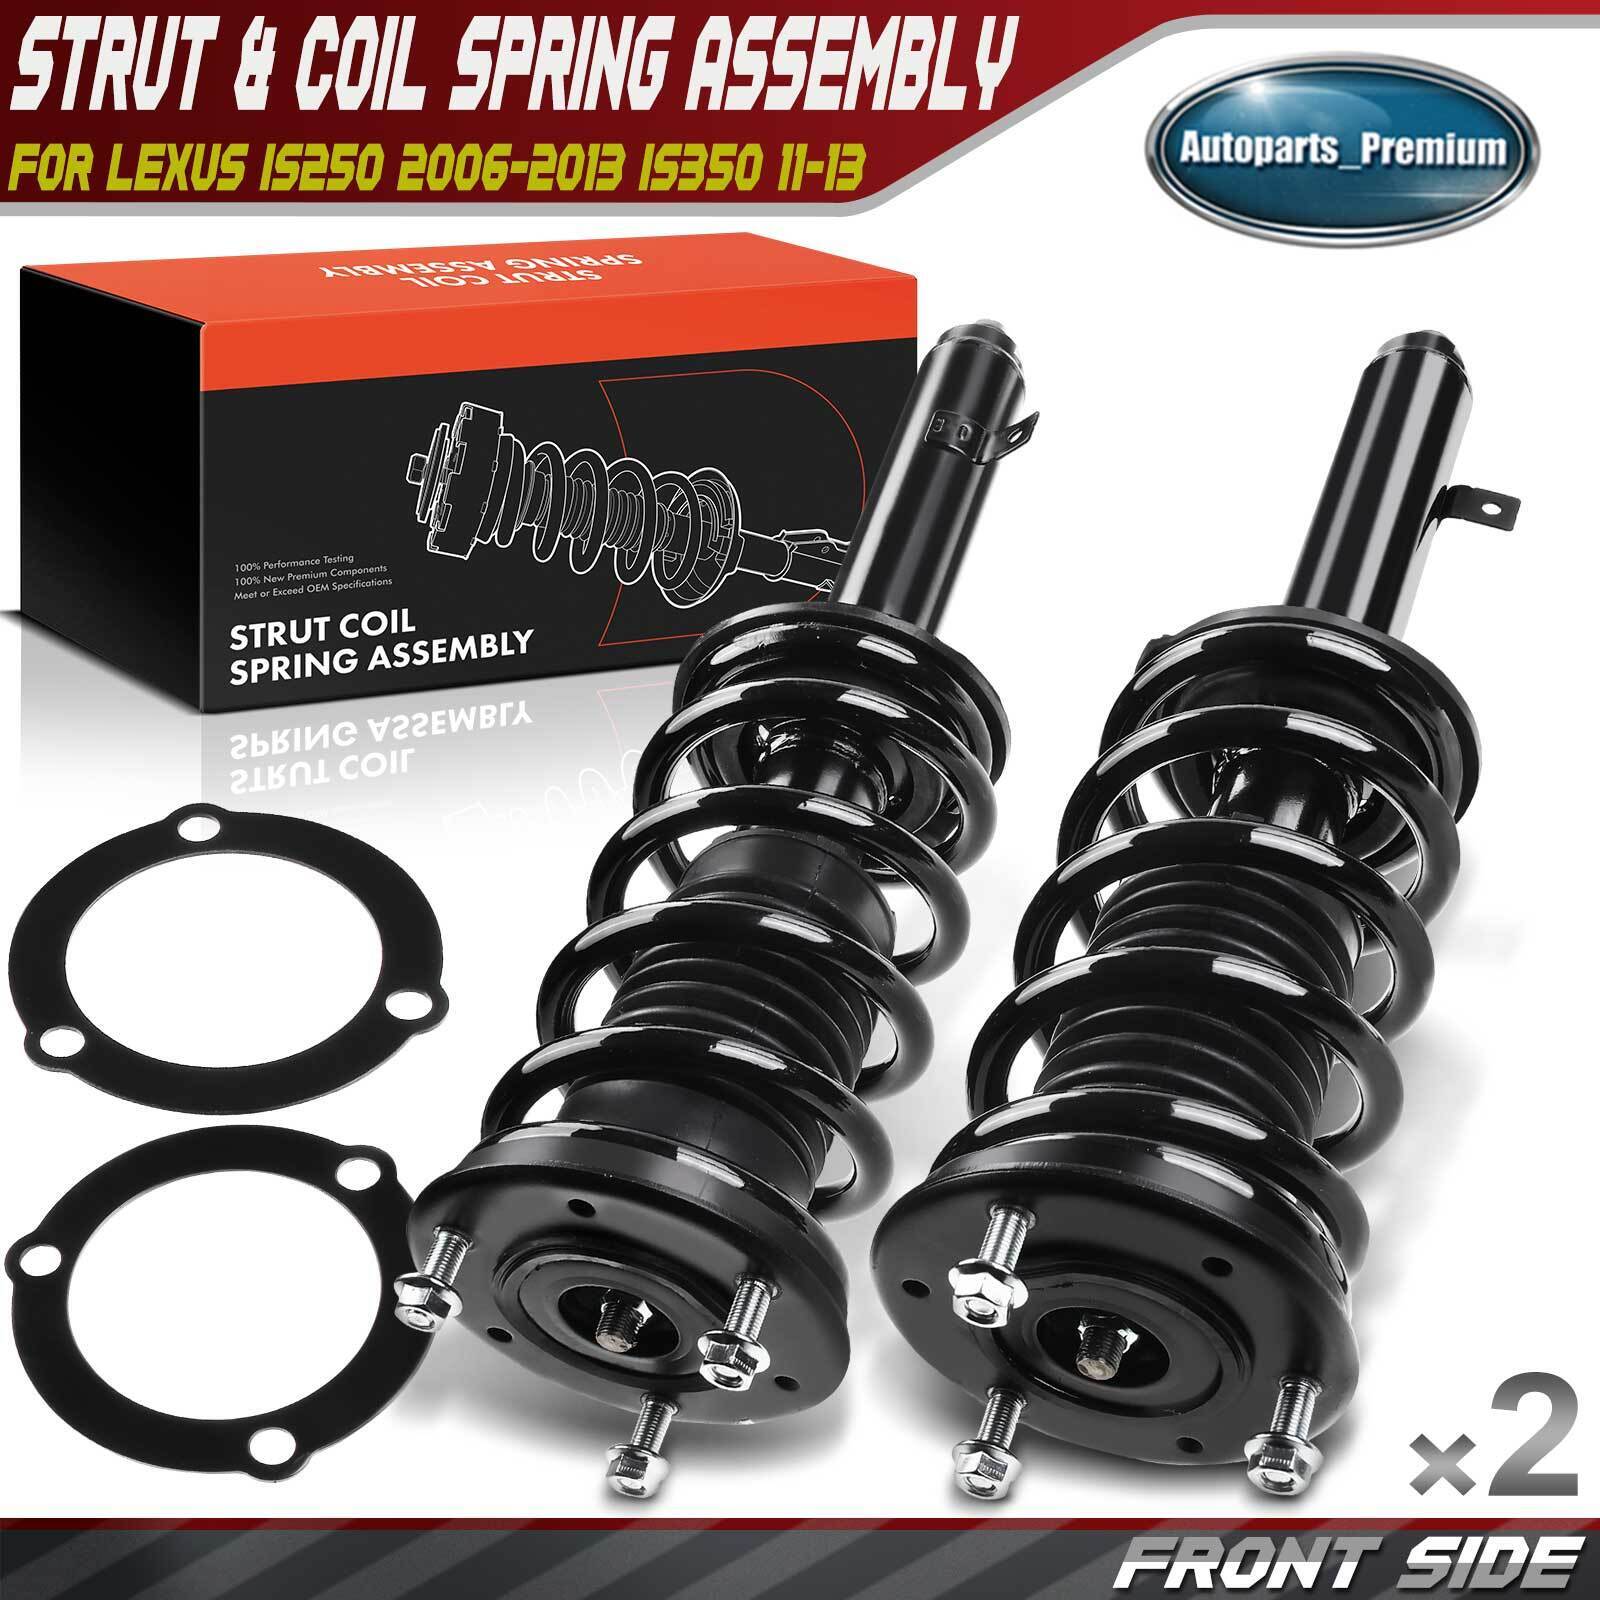 2x Complete Strut & Coil Spring Assembly for Lexus IS250 06-13 IS350 11-13 AWD